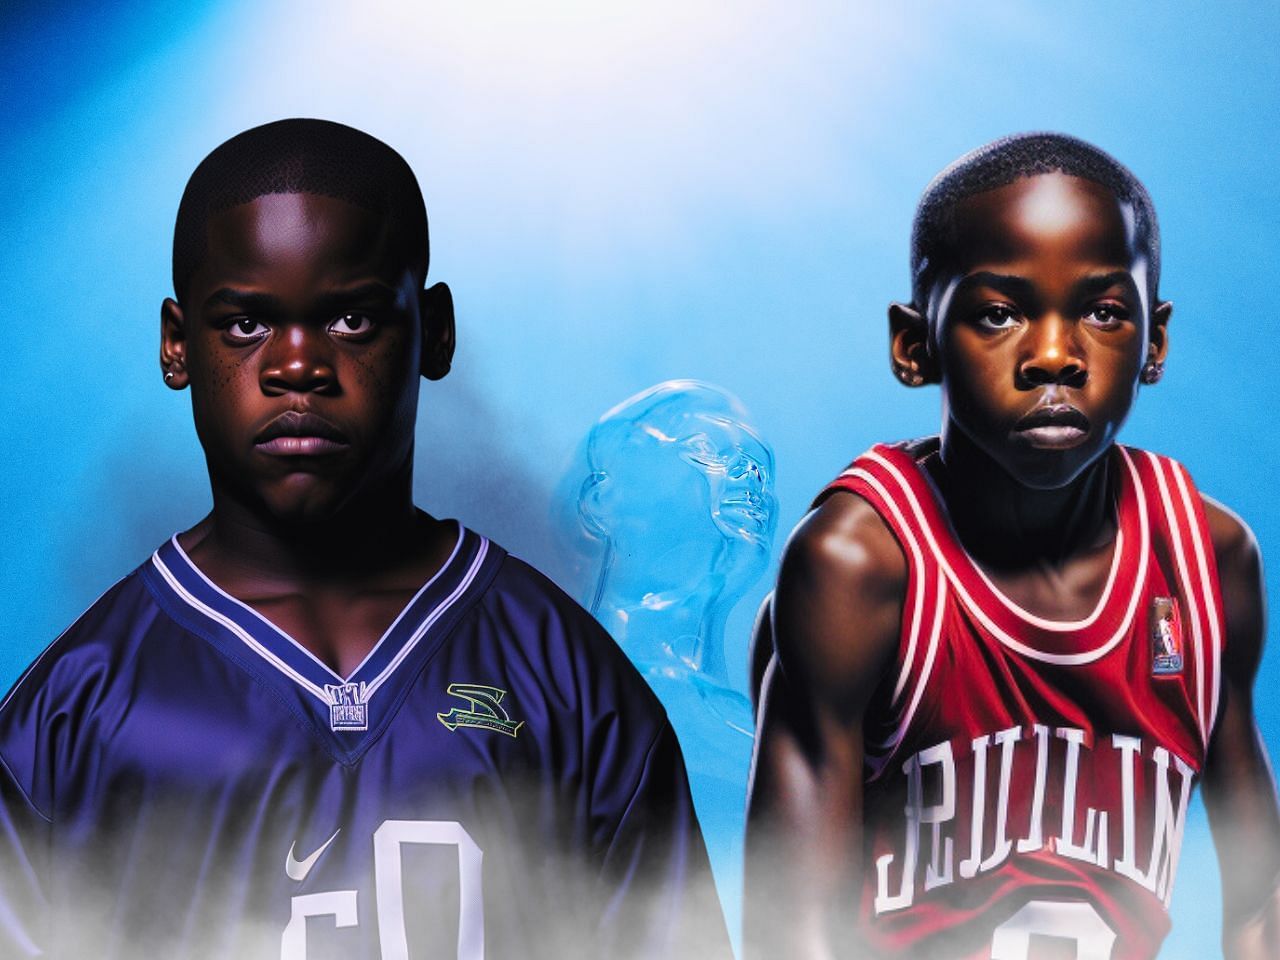 NBA stars from past to present reimagined as babies through AI generated art